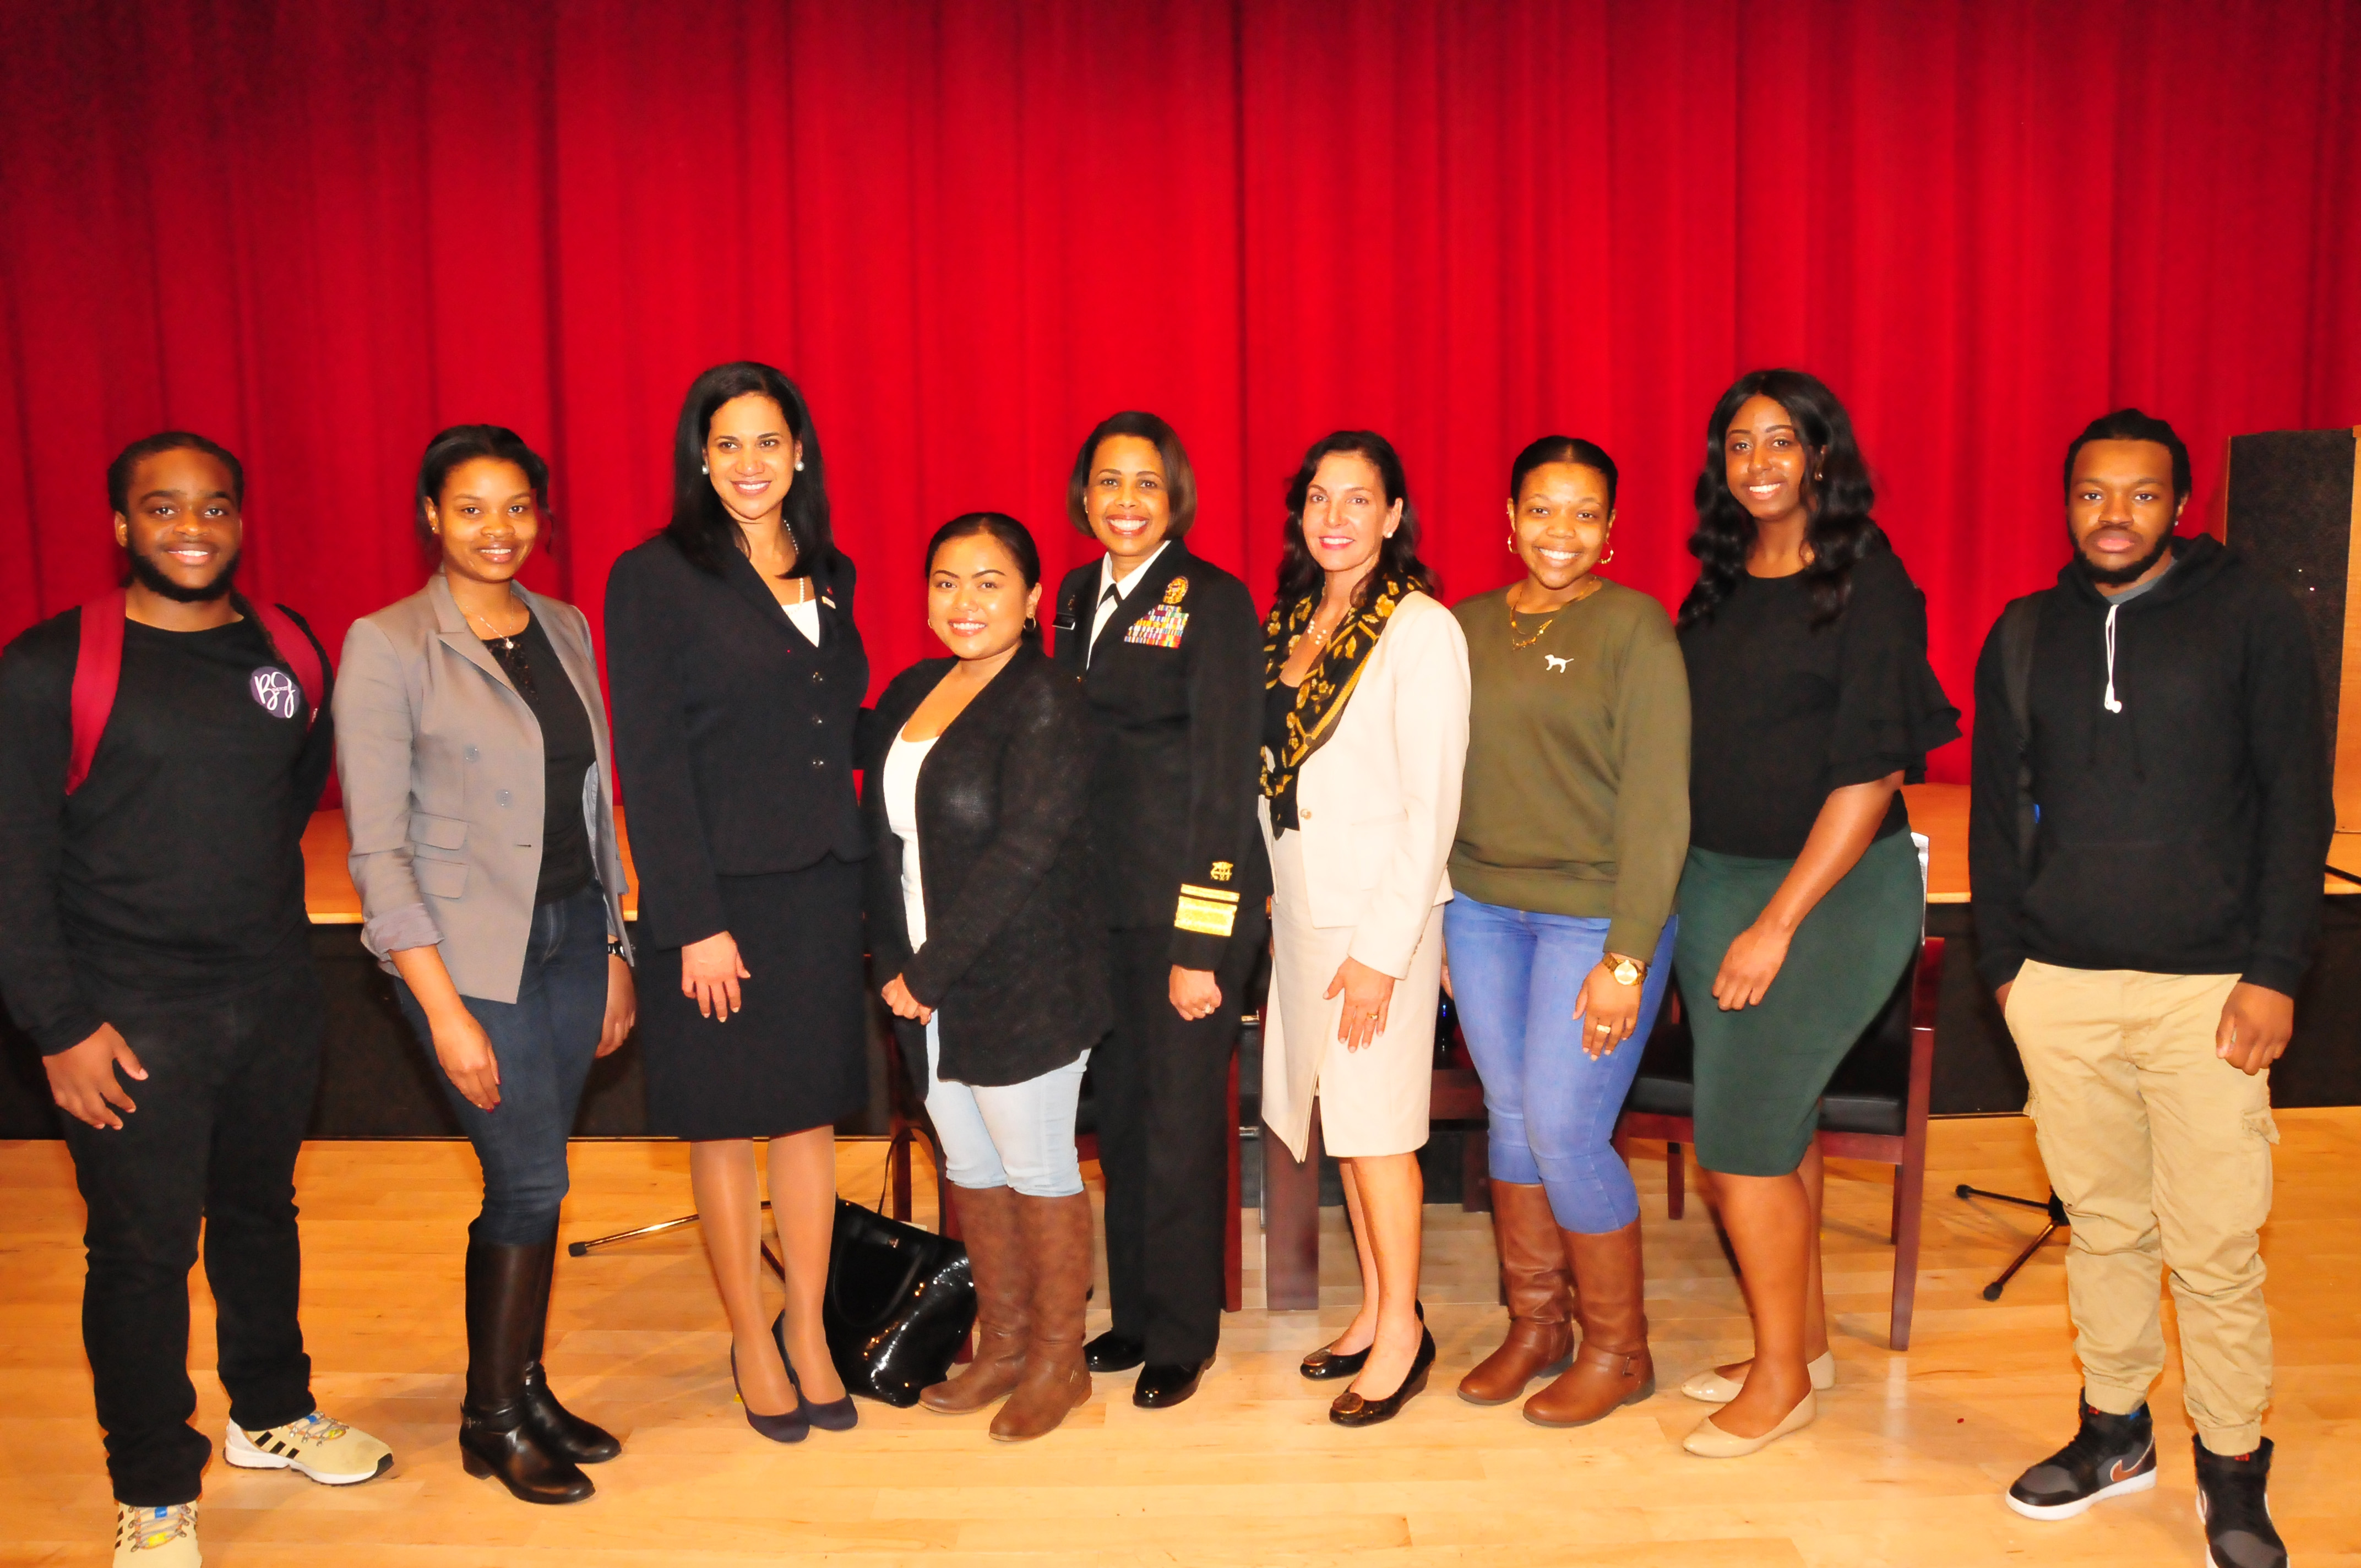 Deputy U.S. Surgeon General Dr. Sylvia Trent-Adams (center in military uniform) poses with DSU students. Two persons to the left of Dr. Trent-Adams is Delaware Secretary of Health and Social Services Dr. Kara Odom-Walker. 